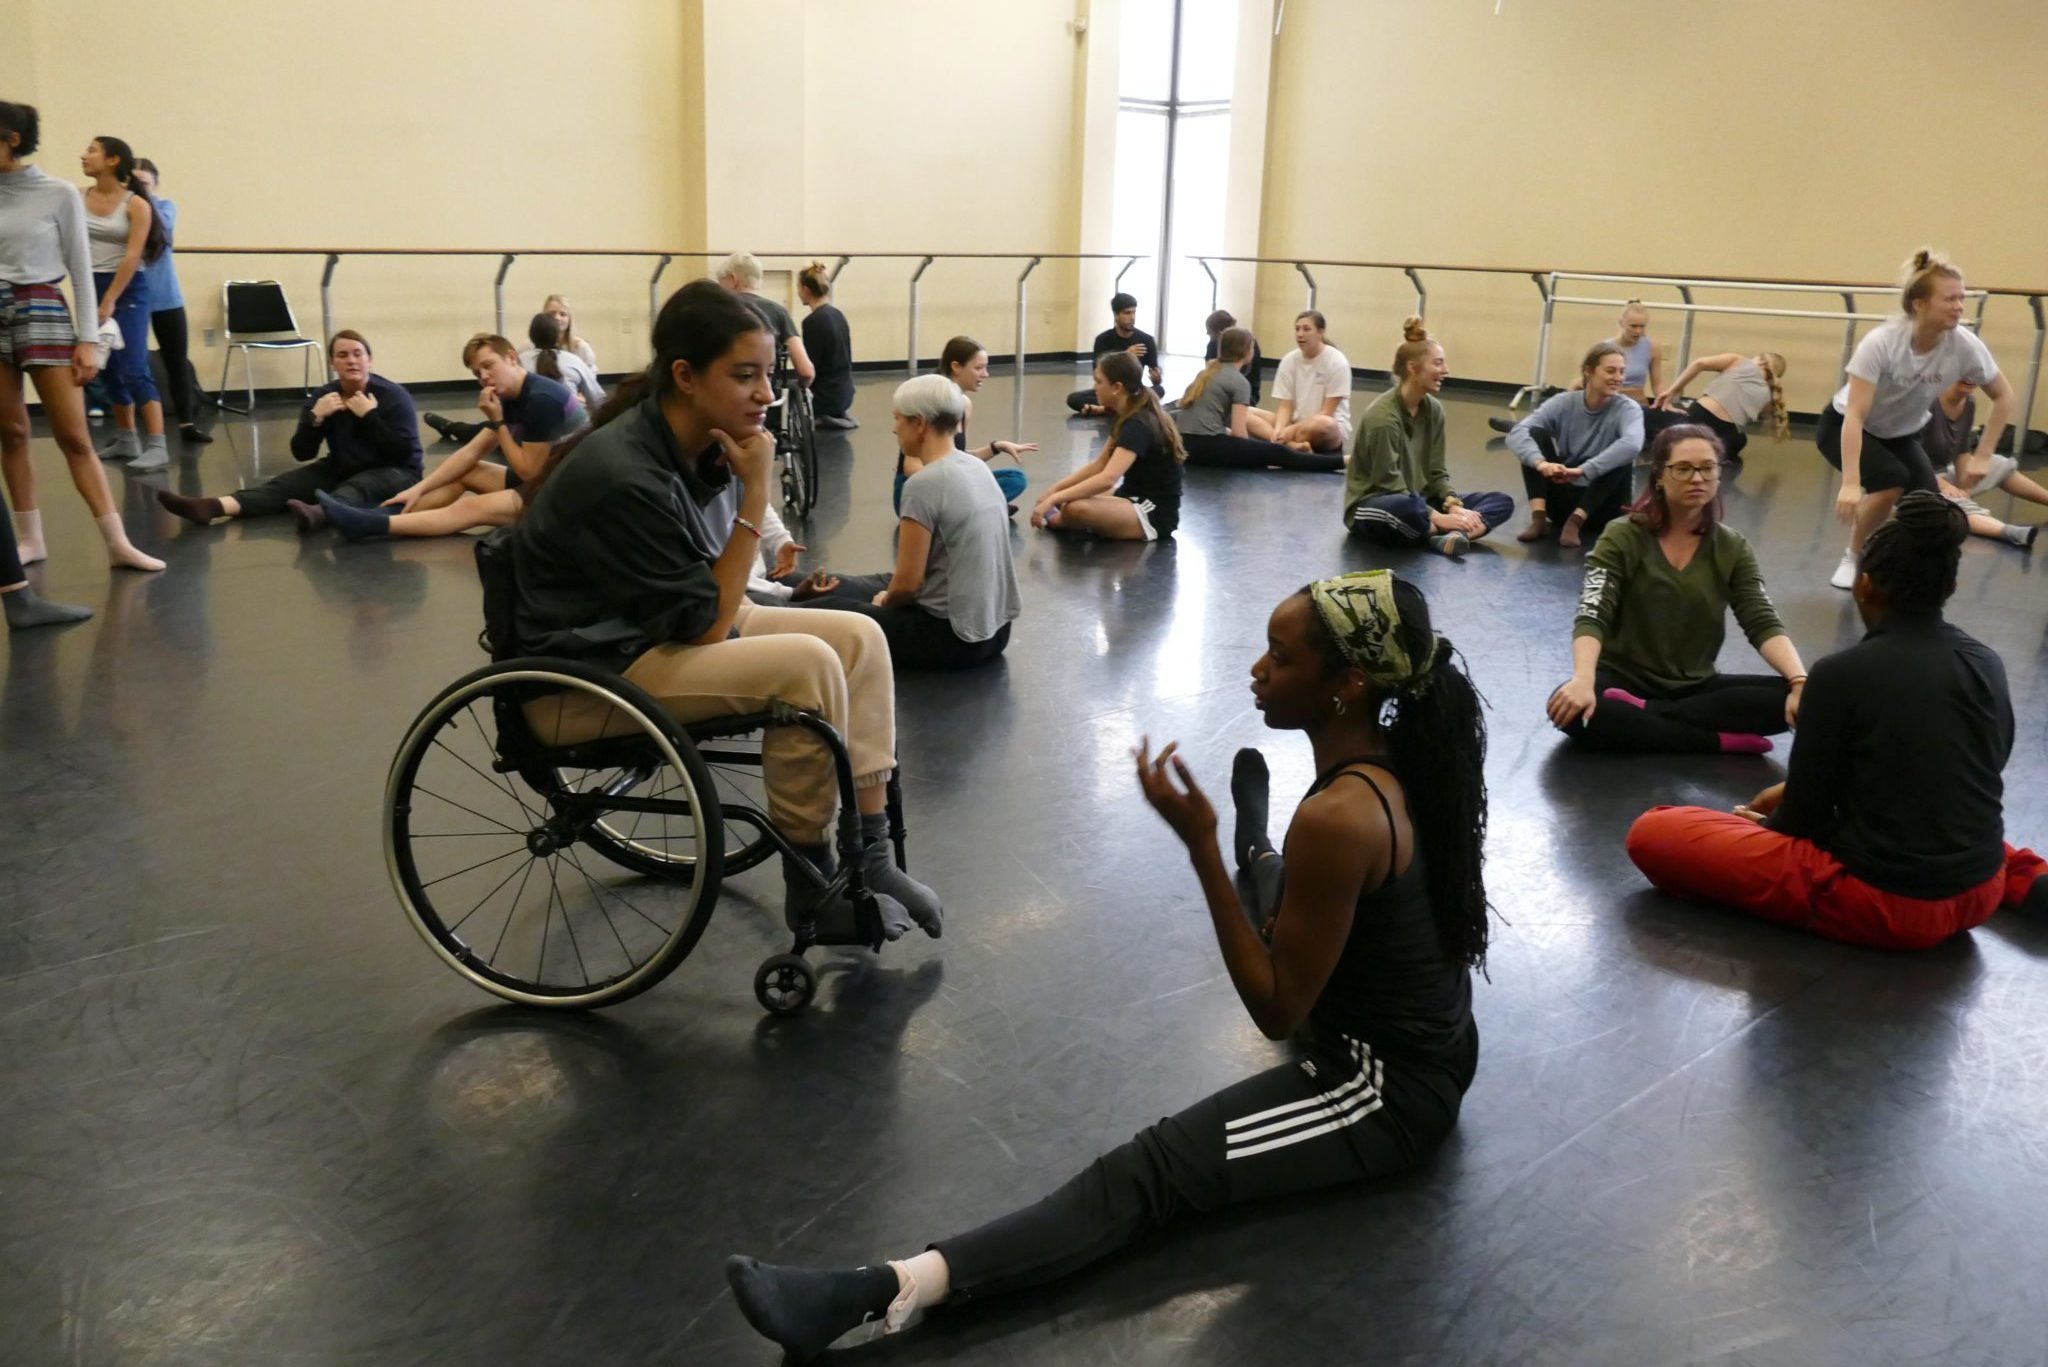 A large group of dancers with and without disabilities stretch in a studio space.